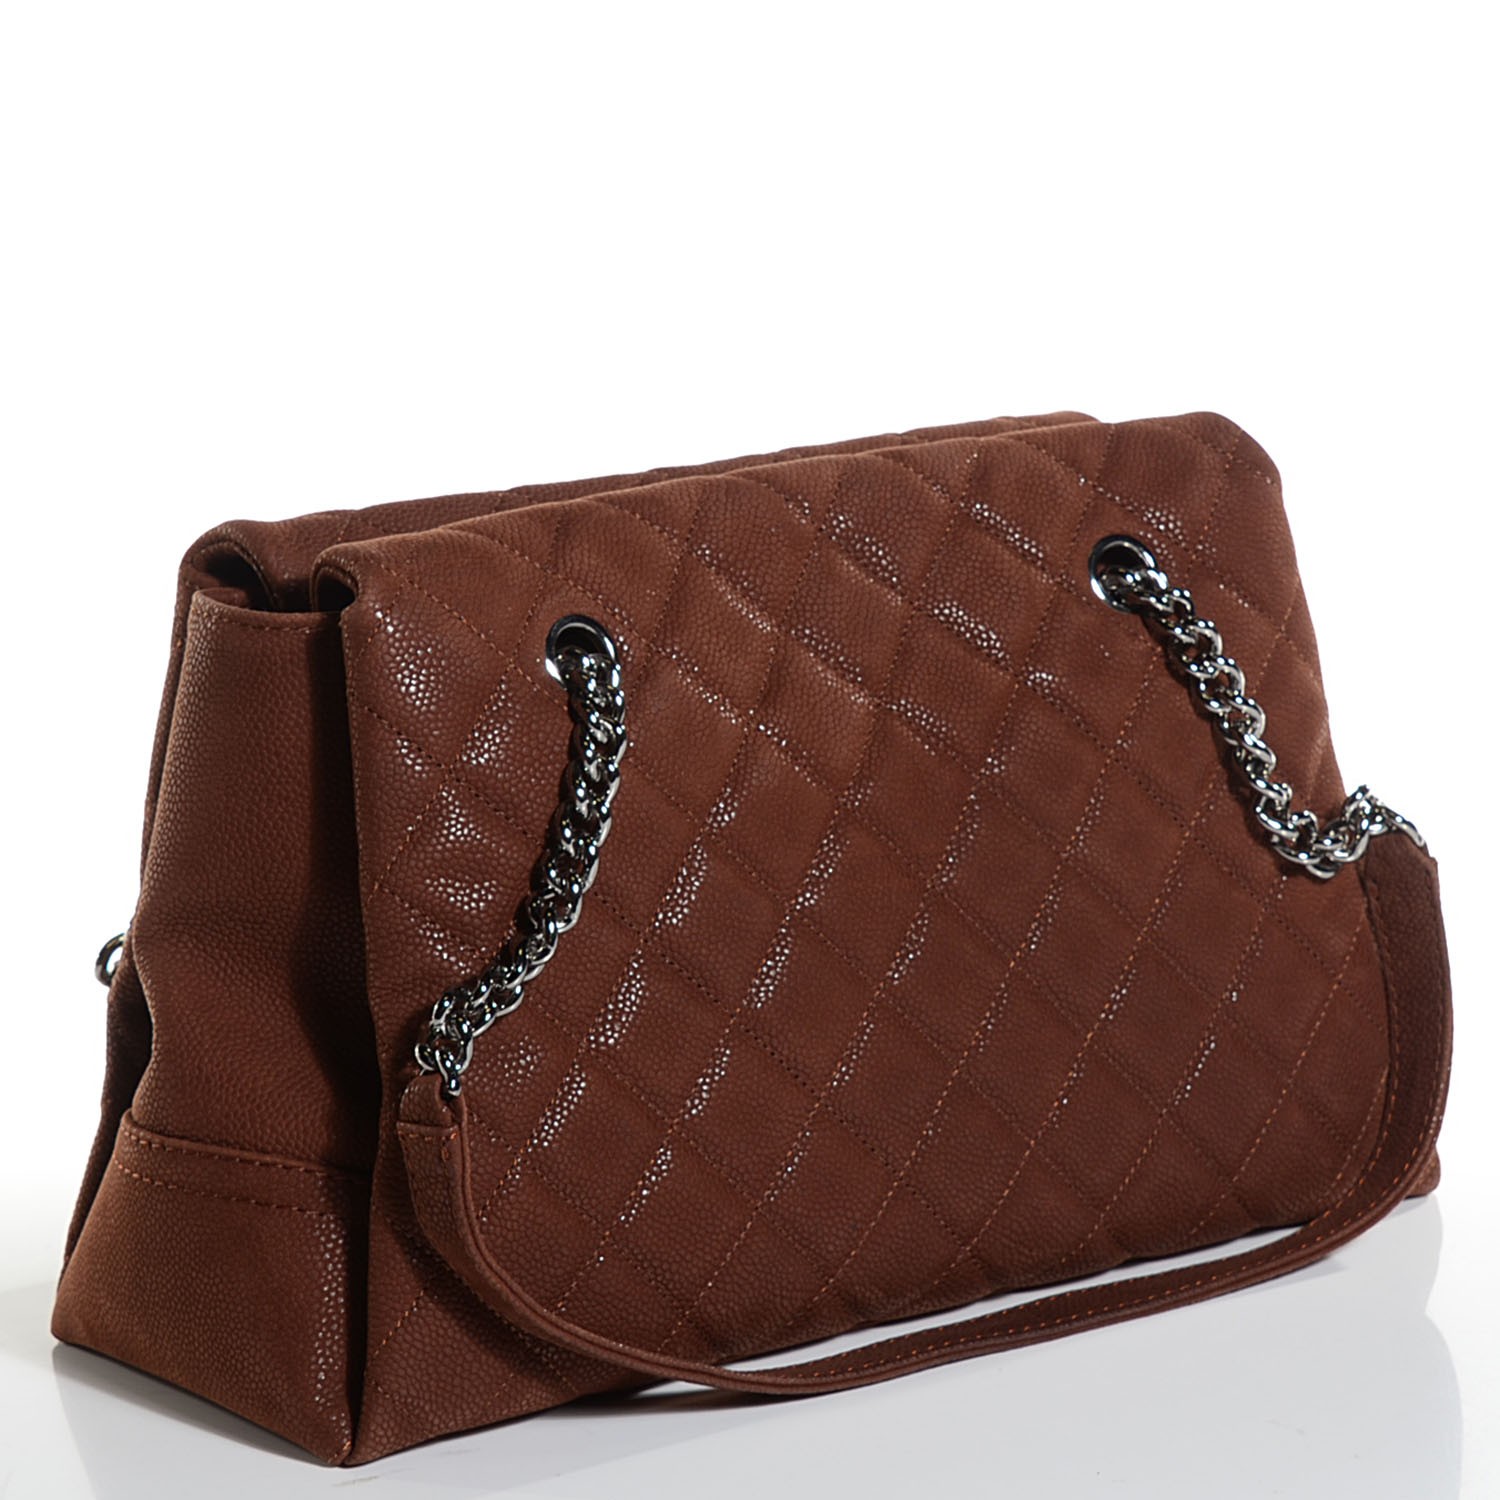 CHANEL Iridescent Caviar Quilted Lady Pearly Tote Brown 104746